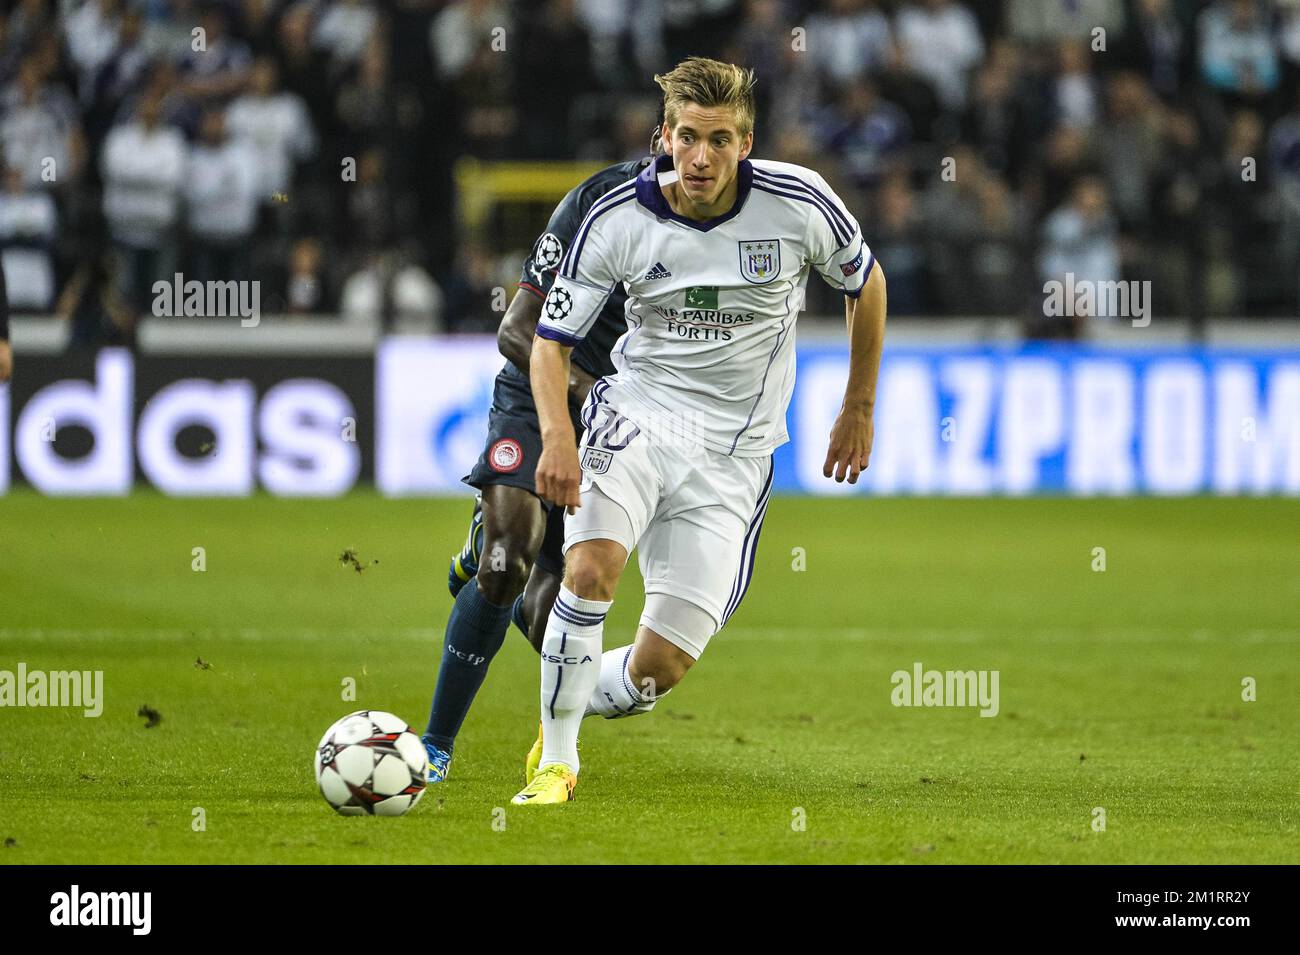 Video: Sacha Kljestan's goal for Anderlecht, his first in Champions League  - NBC Sports